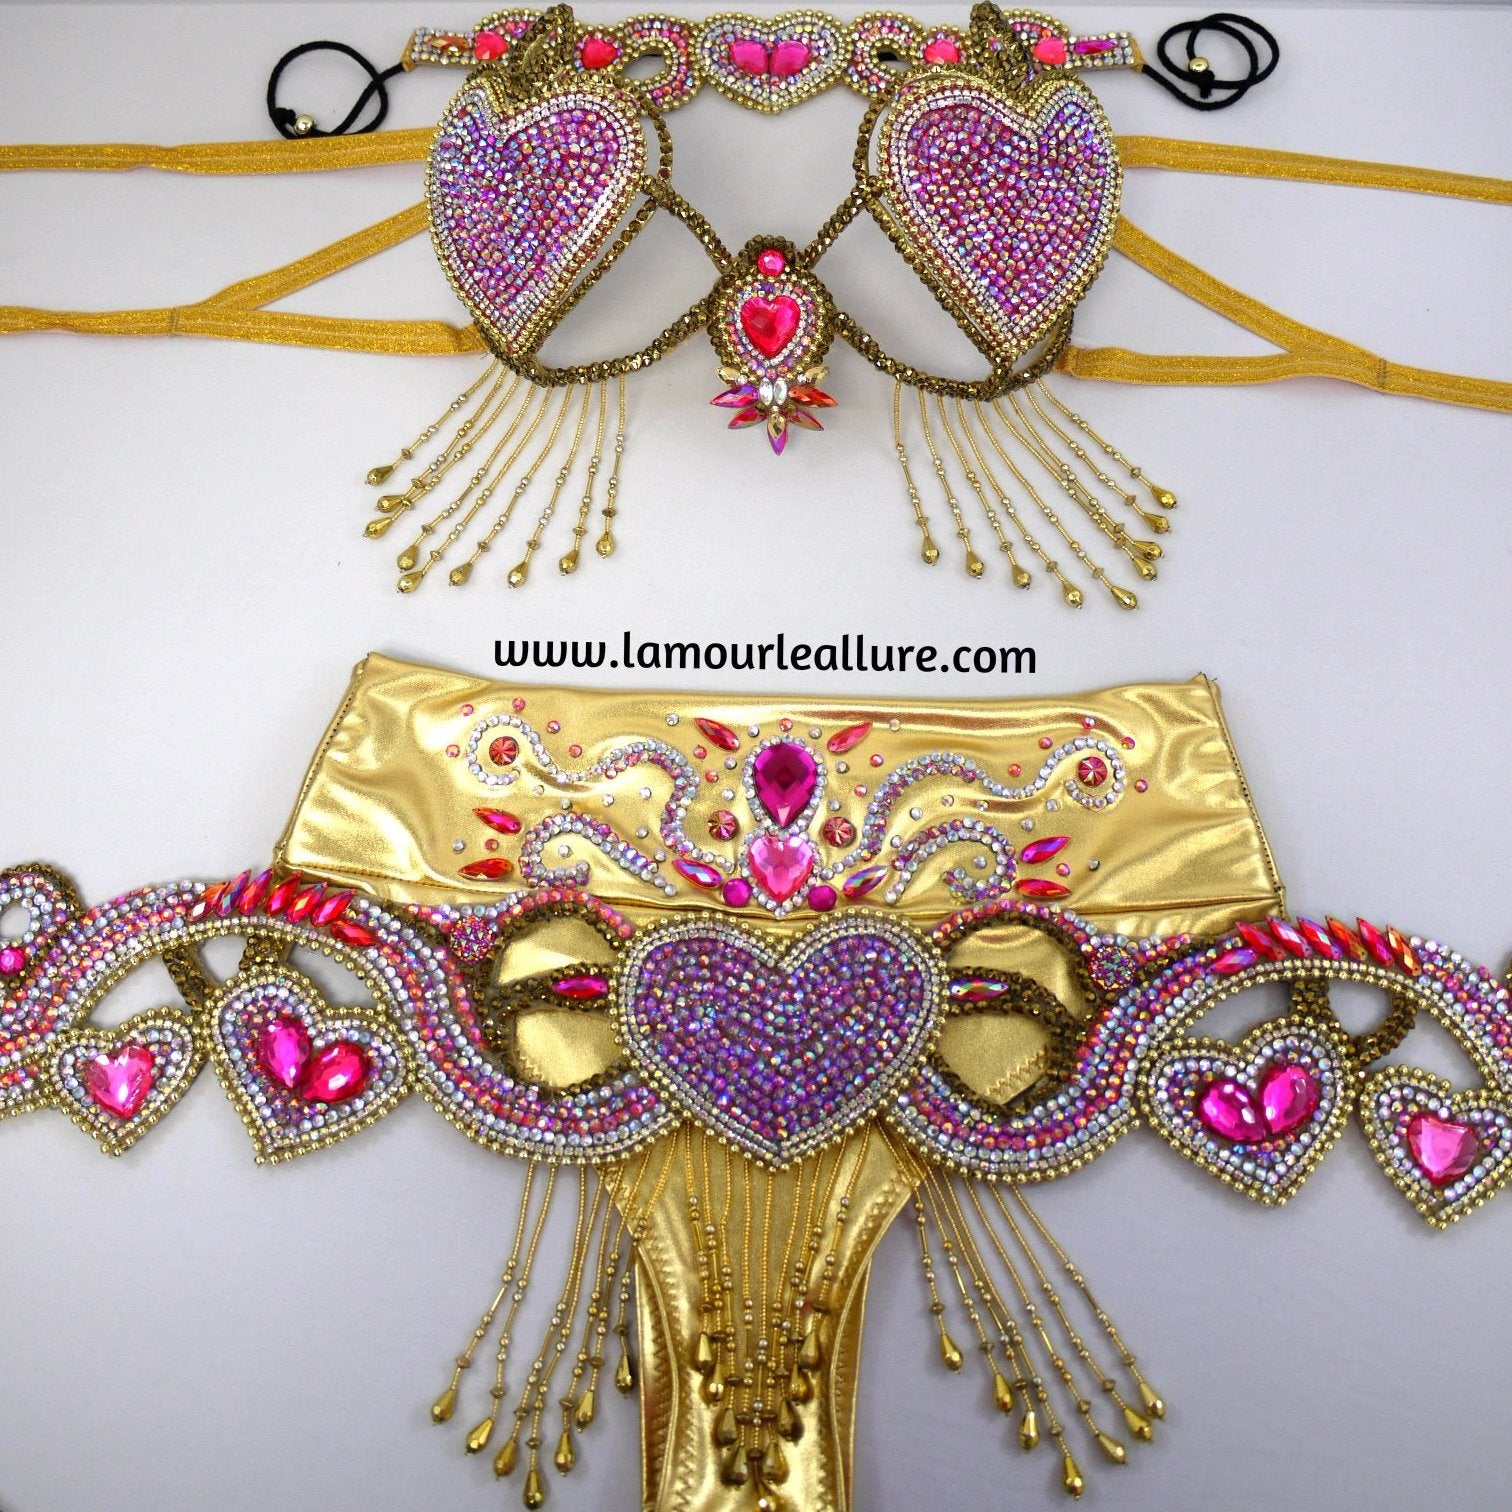 Queen of Hearts Cupid Samba Carnival Top Belt Crown and High Waisted Bottom